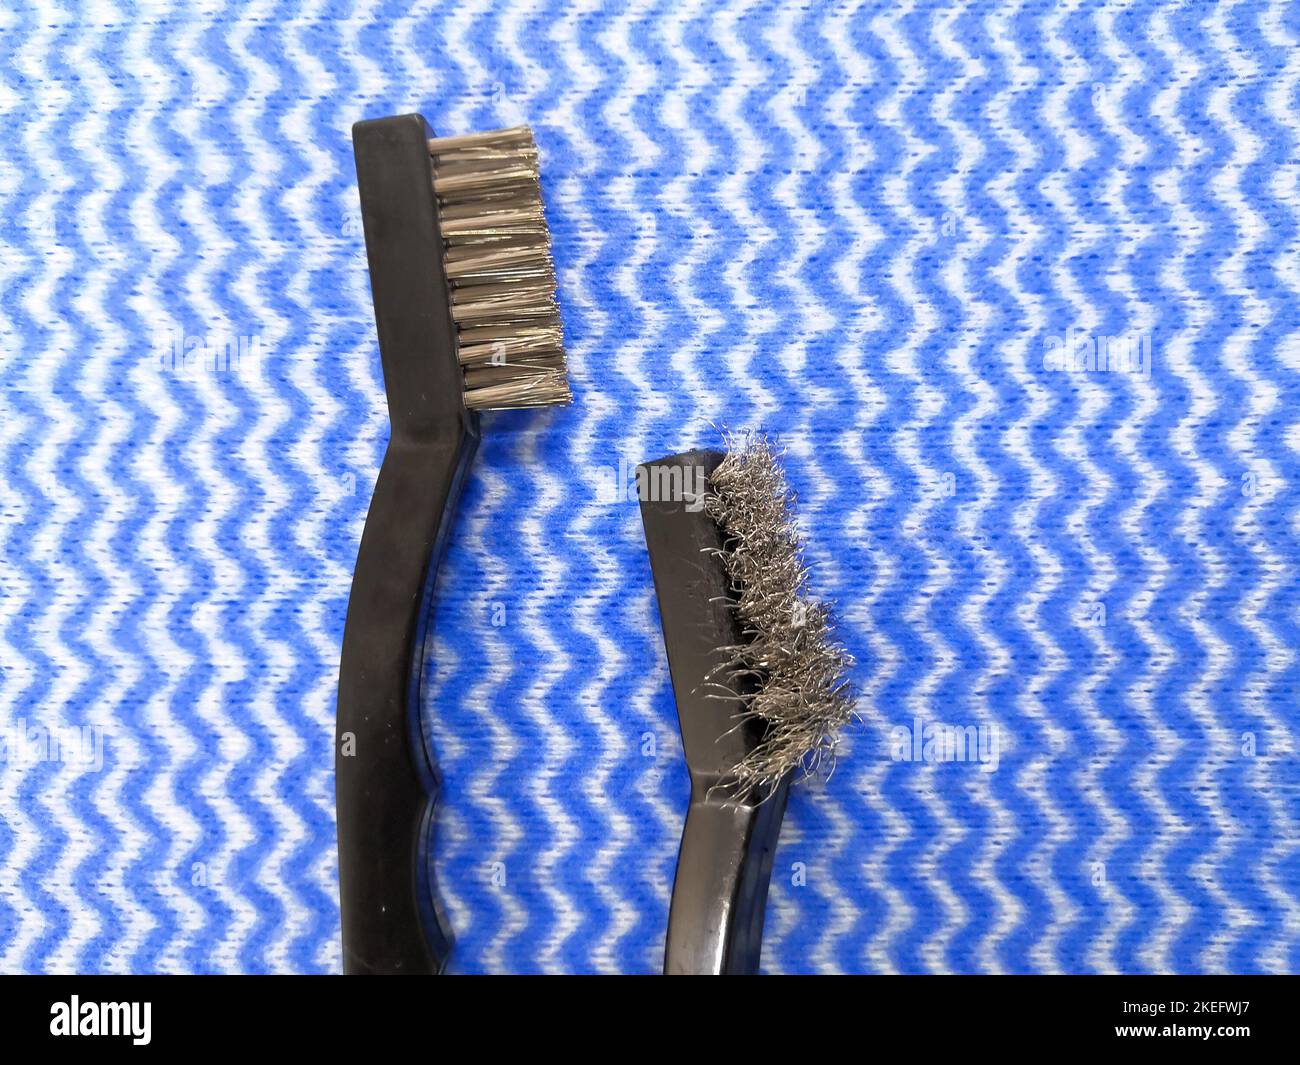 Closeup Image Of Used And New Surgical Instrument Cleaning Bristle Brushes Stock Photo